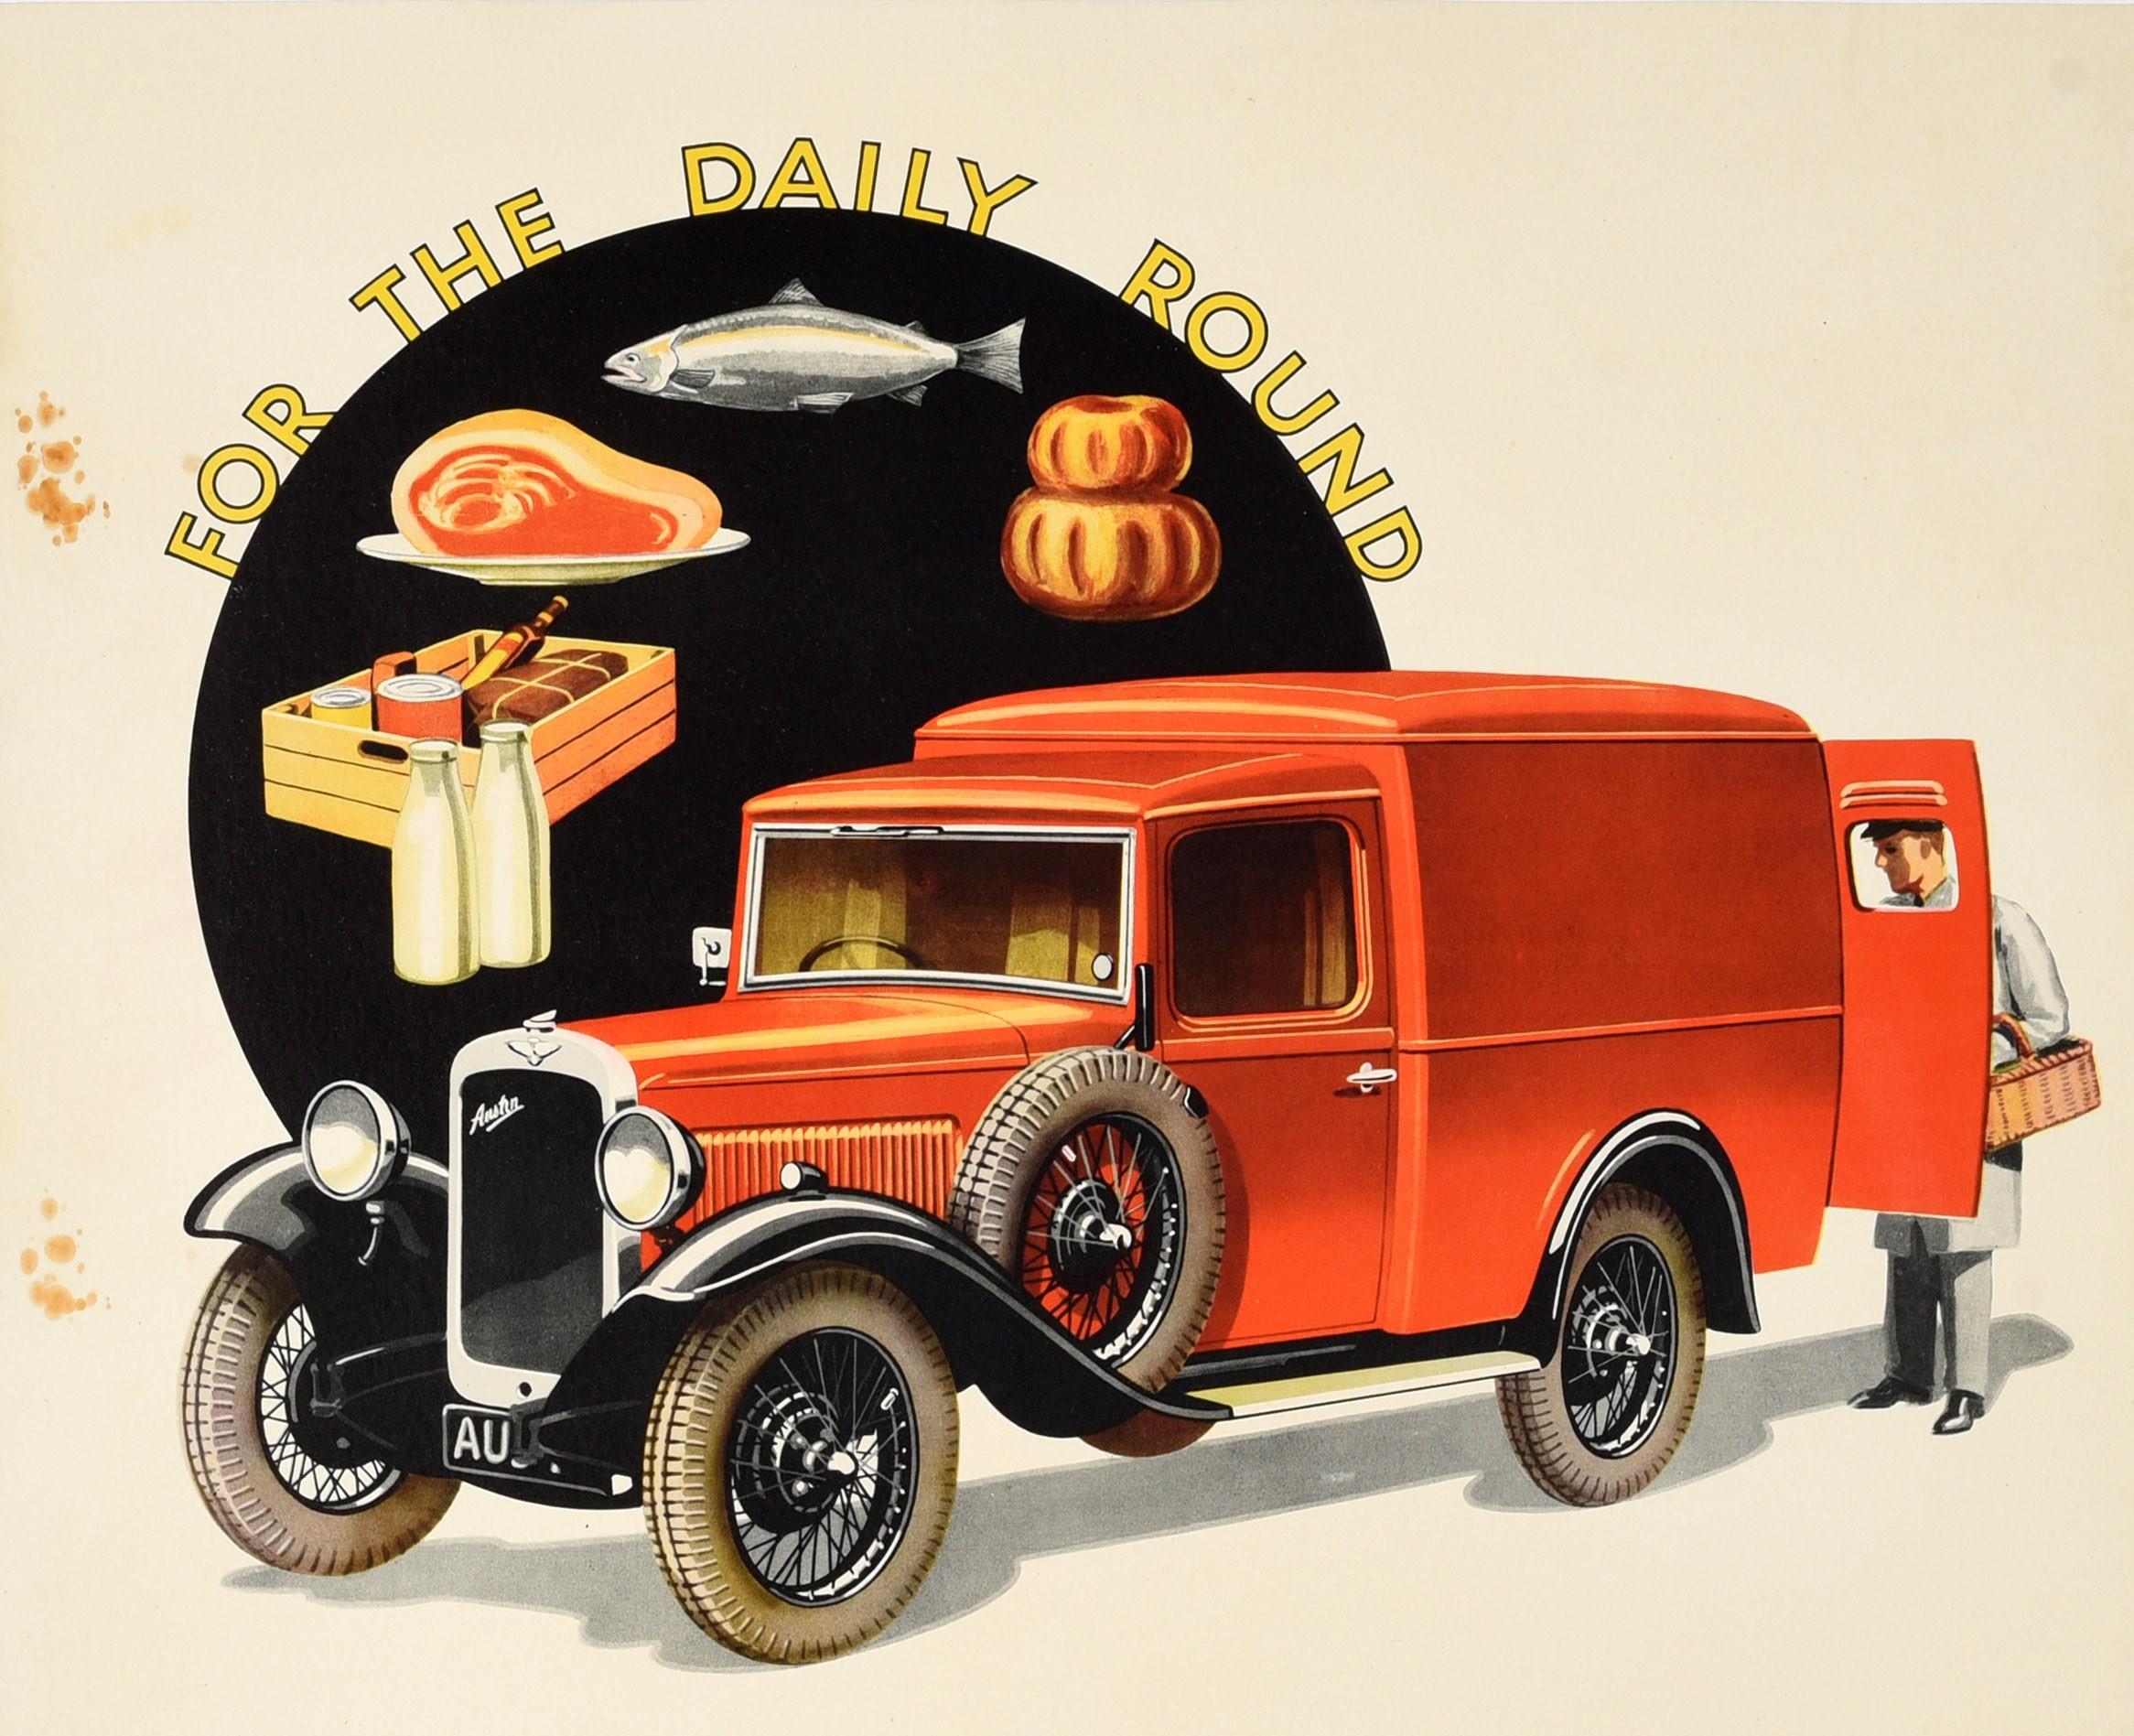 Original vintage advertising poster - For the daily round Austin Delivery Vans Dependable & Speedy Service - featuring a great Art Deco design depicting a smartly dressed delivery man in a suit and white coat loading a shopping basket at the back of